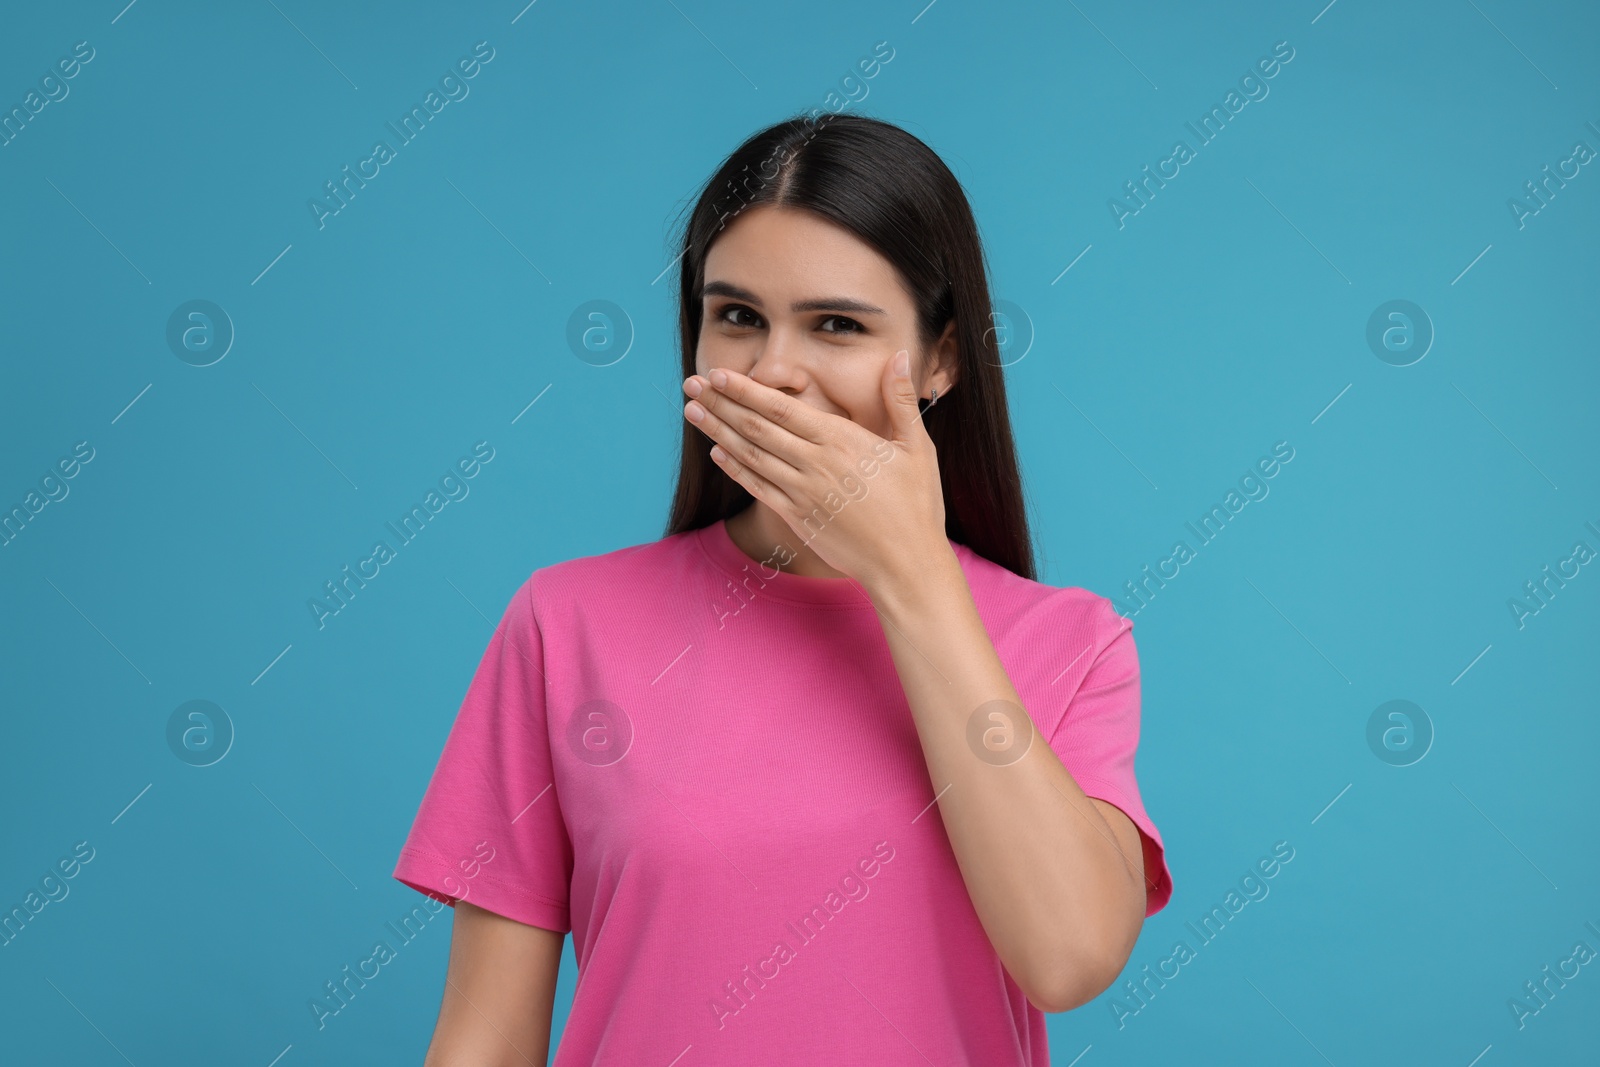 Photo of Embarrassed woman covering mouth with hand on light blue background